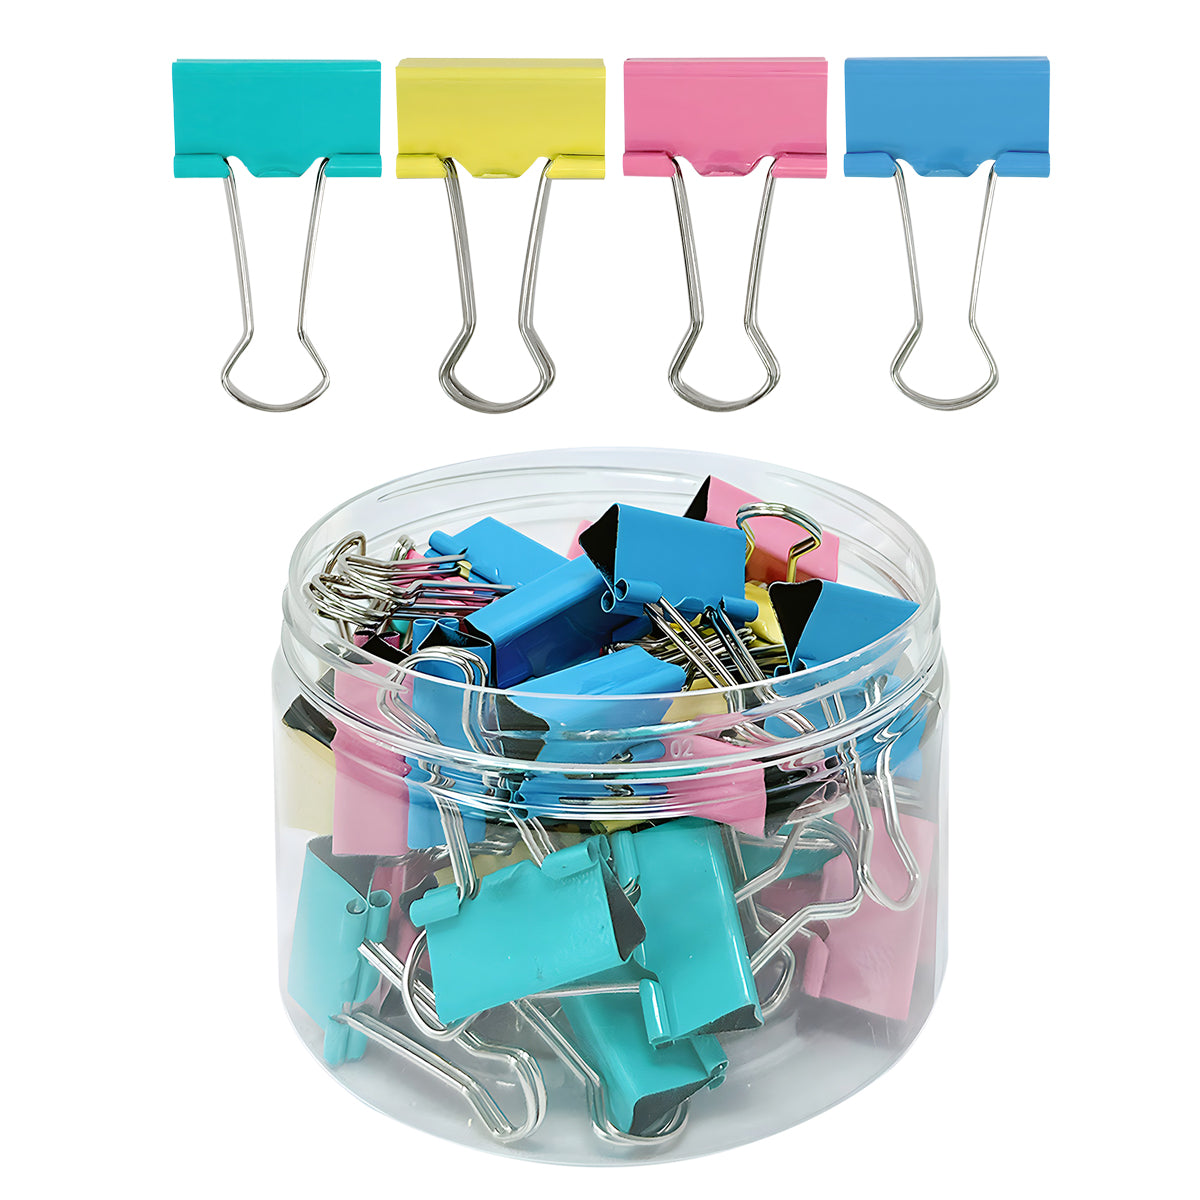 Wrapables Multicolor Binder Clips for Office, Paper Clamps, Paper Clips